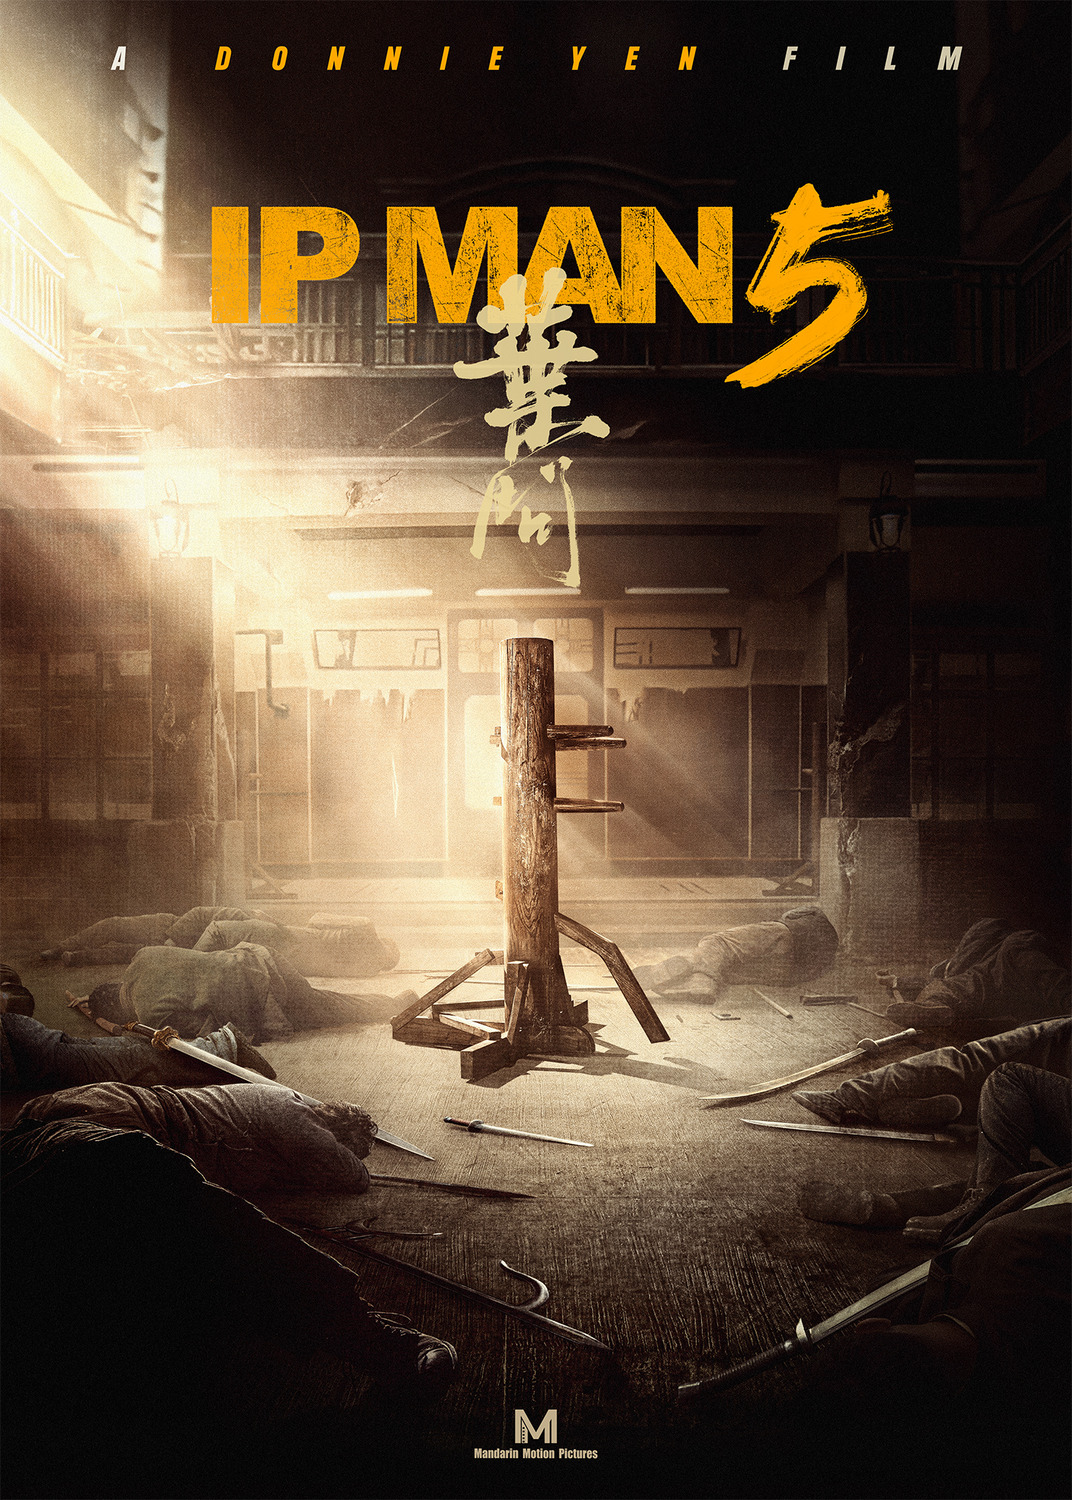 Extra Large Movie Poster Image for Ip Man 5 